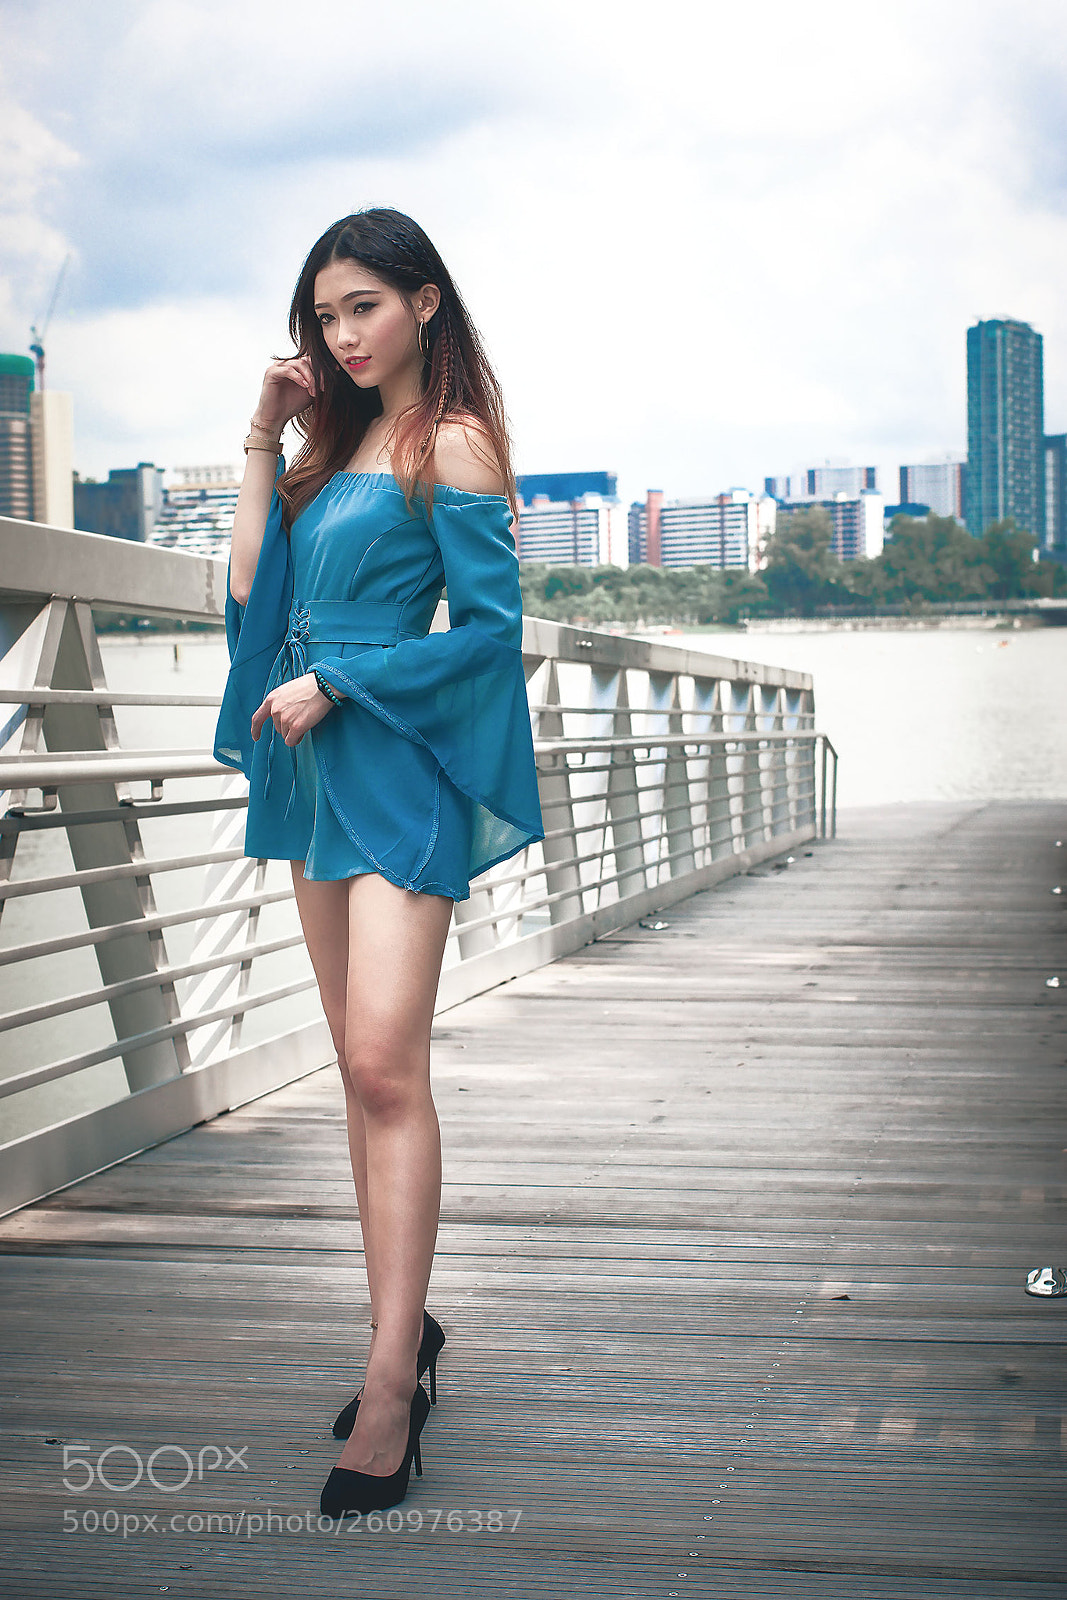 Sony a6000 sample photo. Shi hwee rose photography